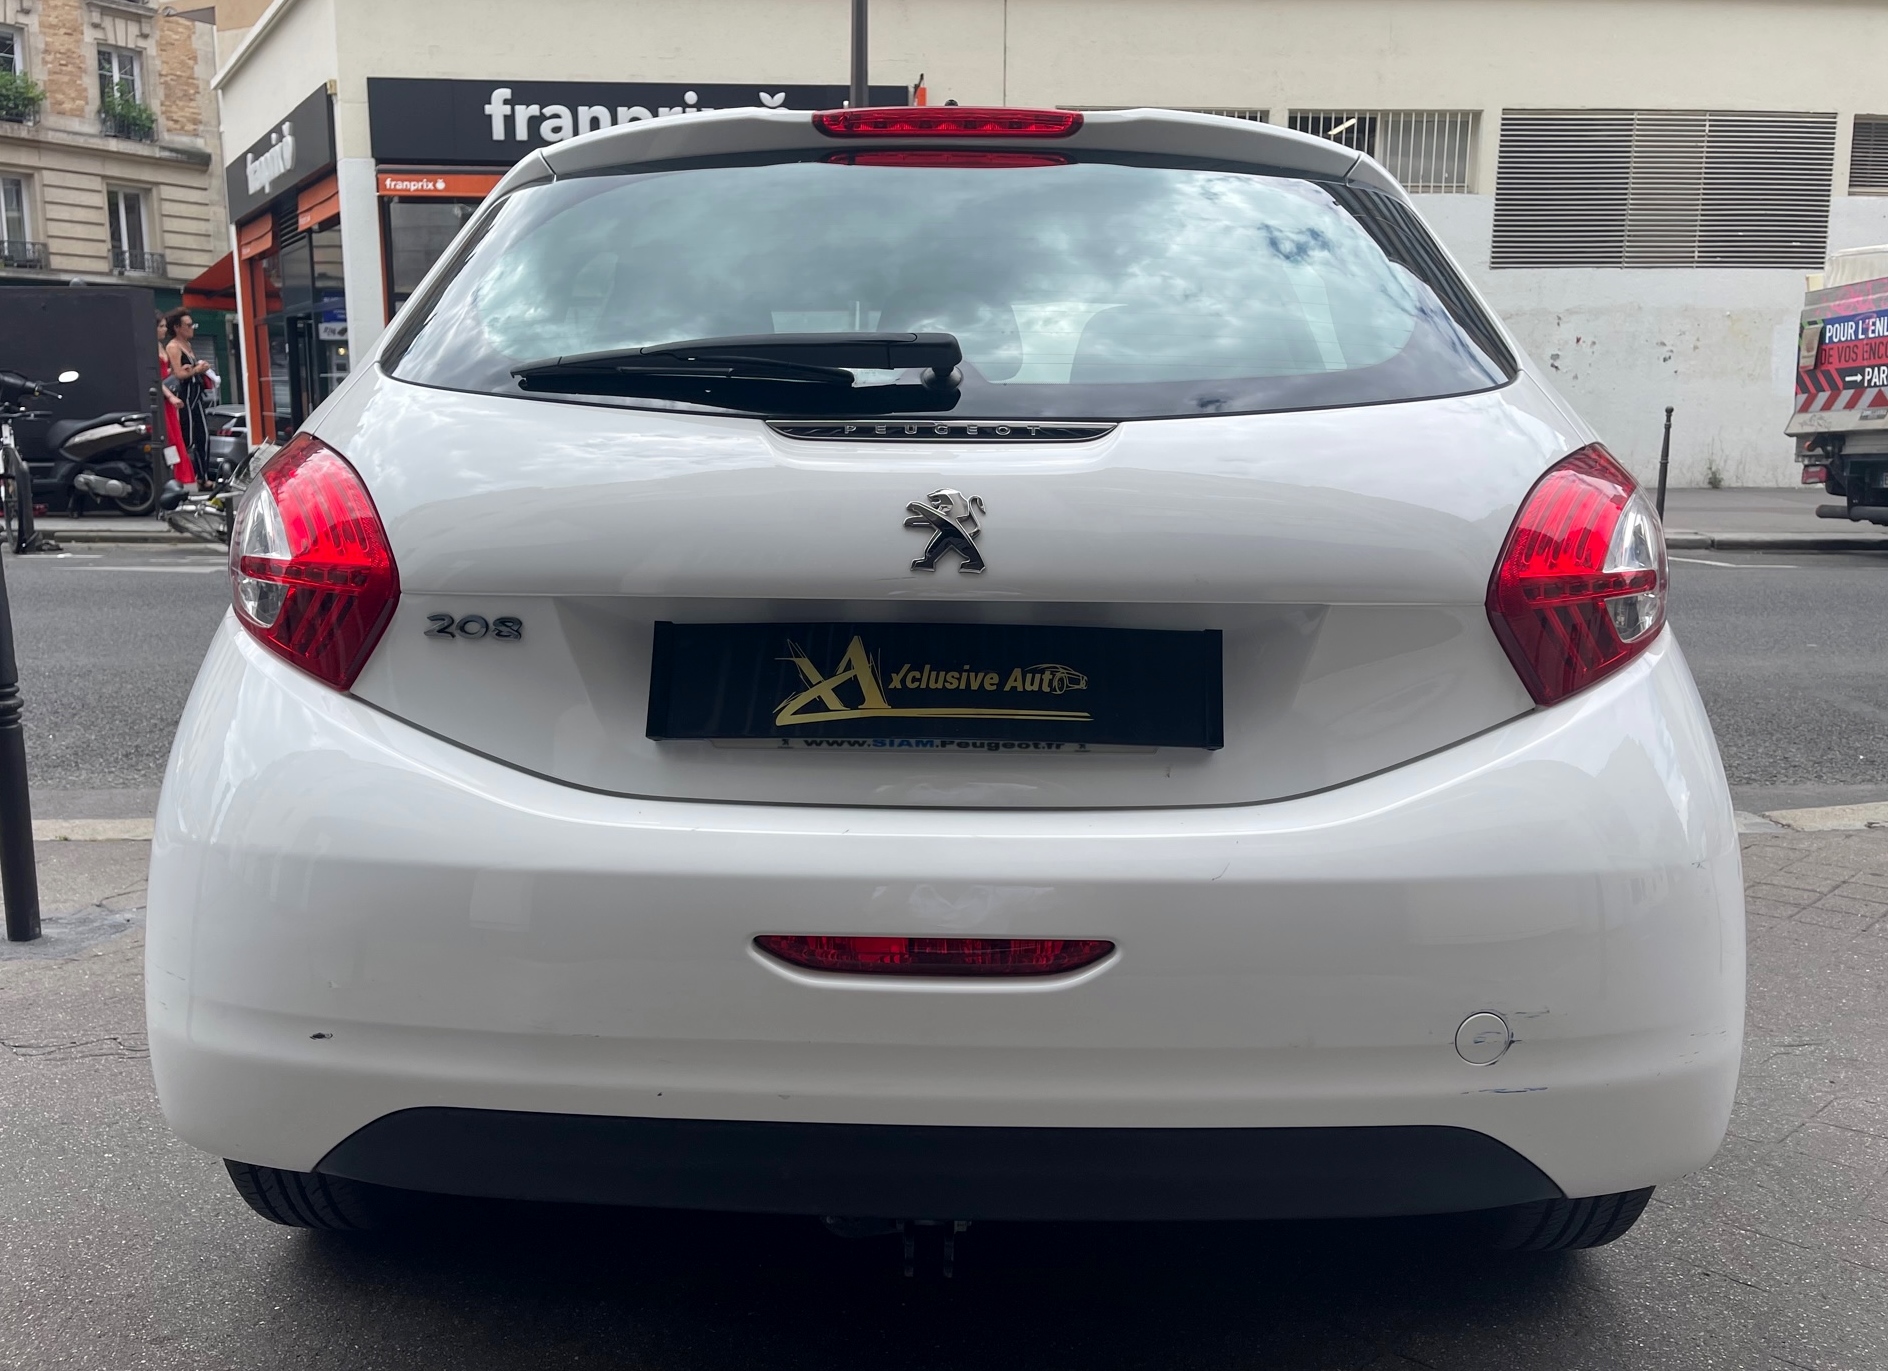 PEUGEOT 208 1.4 HDI 68 ACTIVE 3